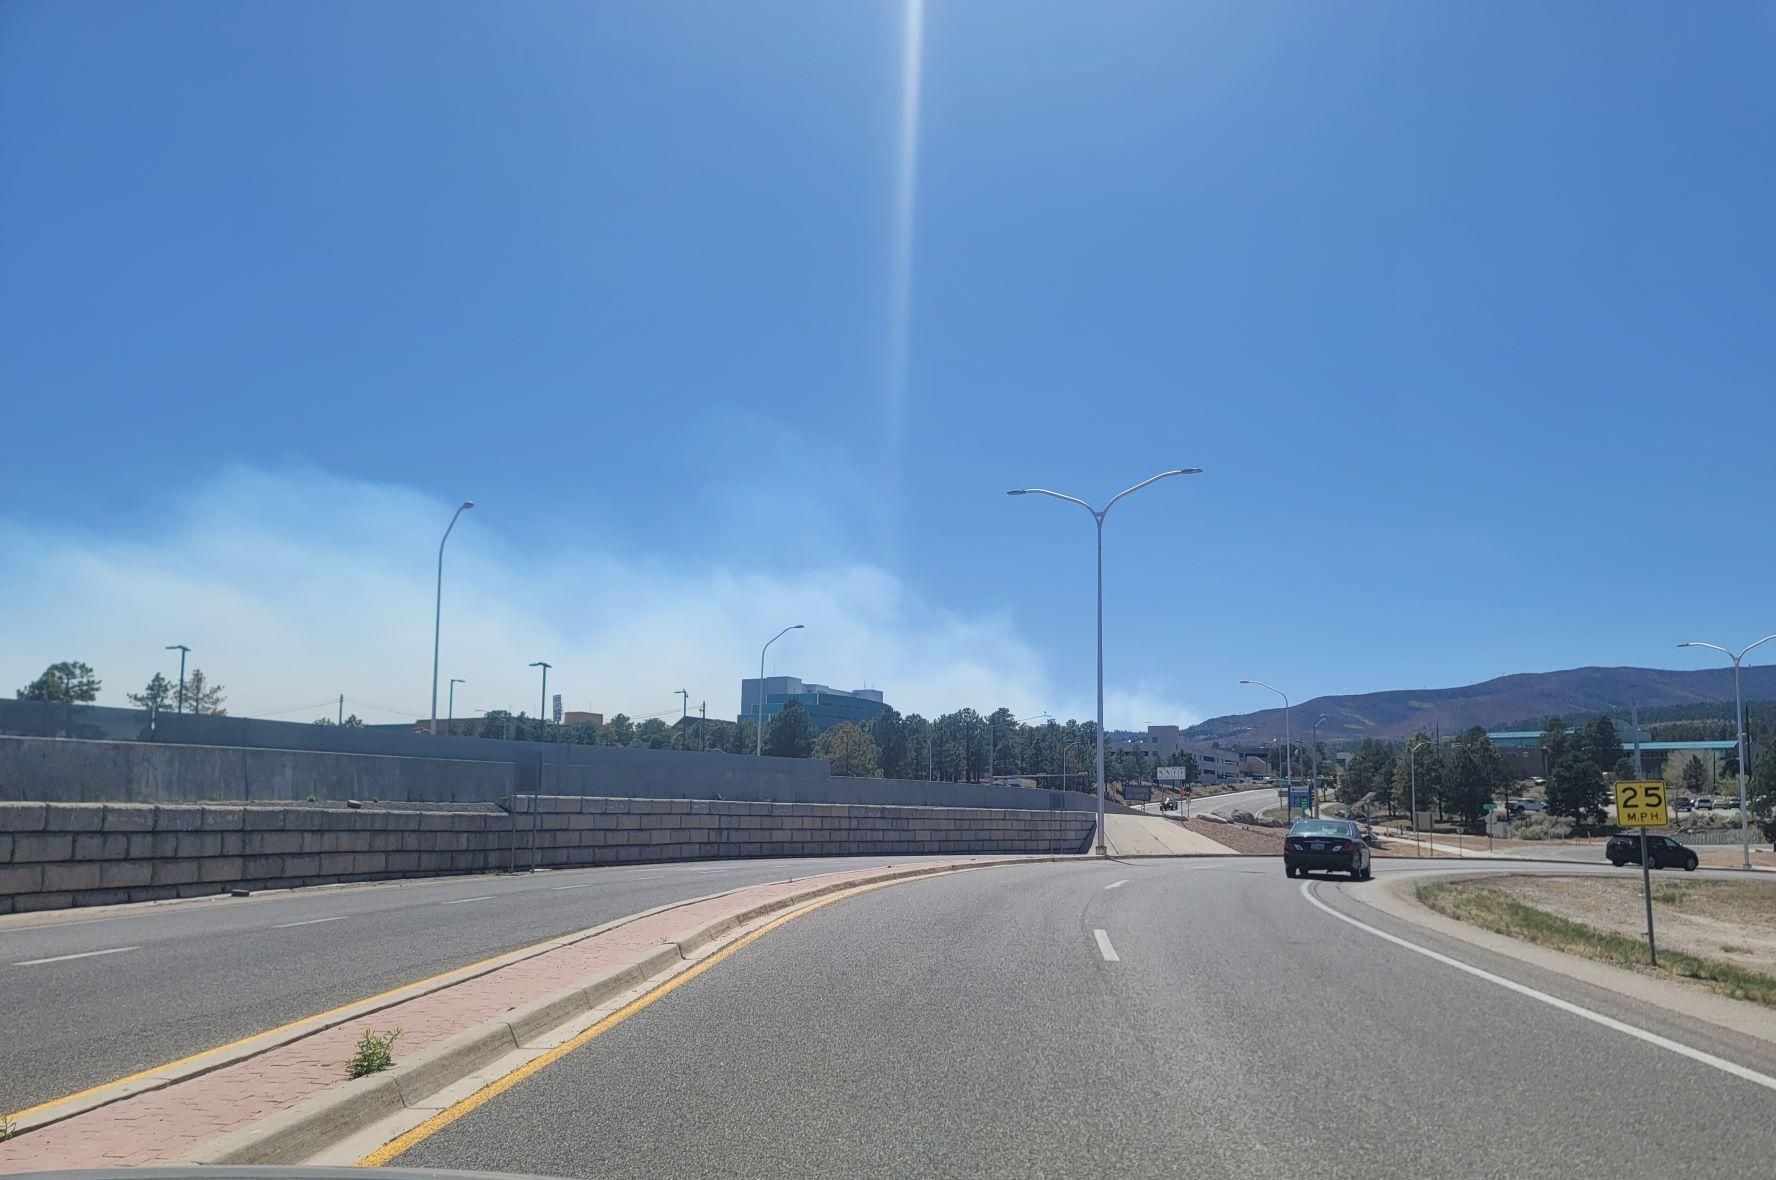 Smoke from the Cerro Pelado Fire as seen from Los Alamos as cars drive on a highway.